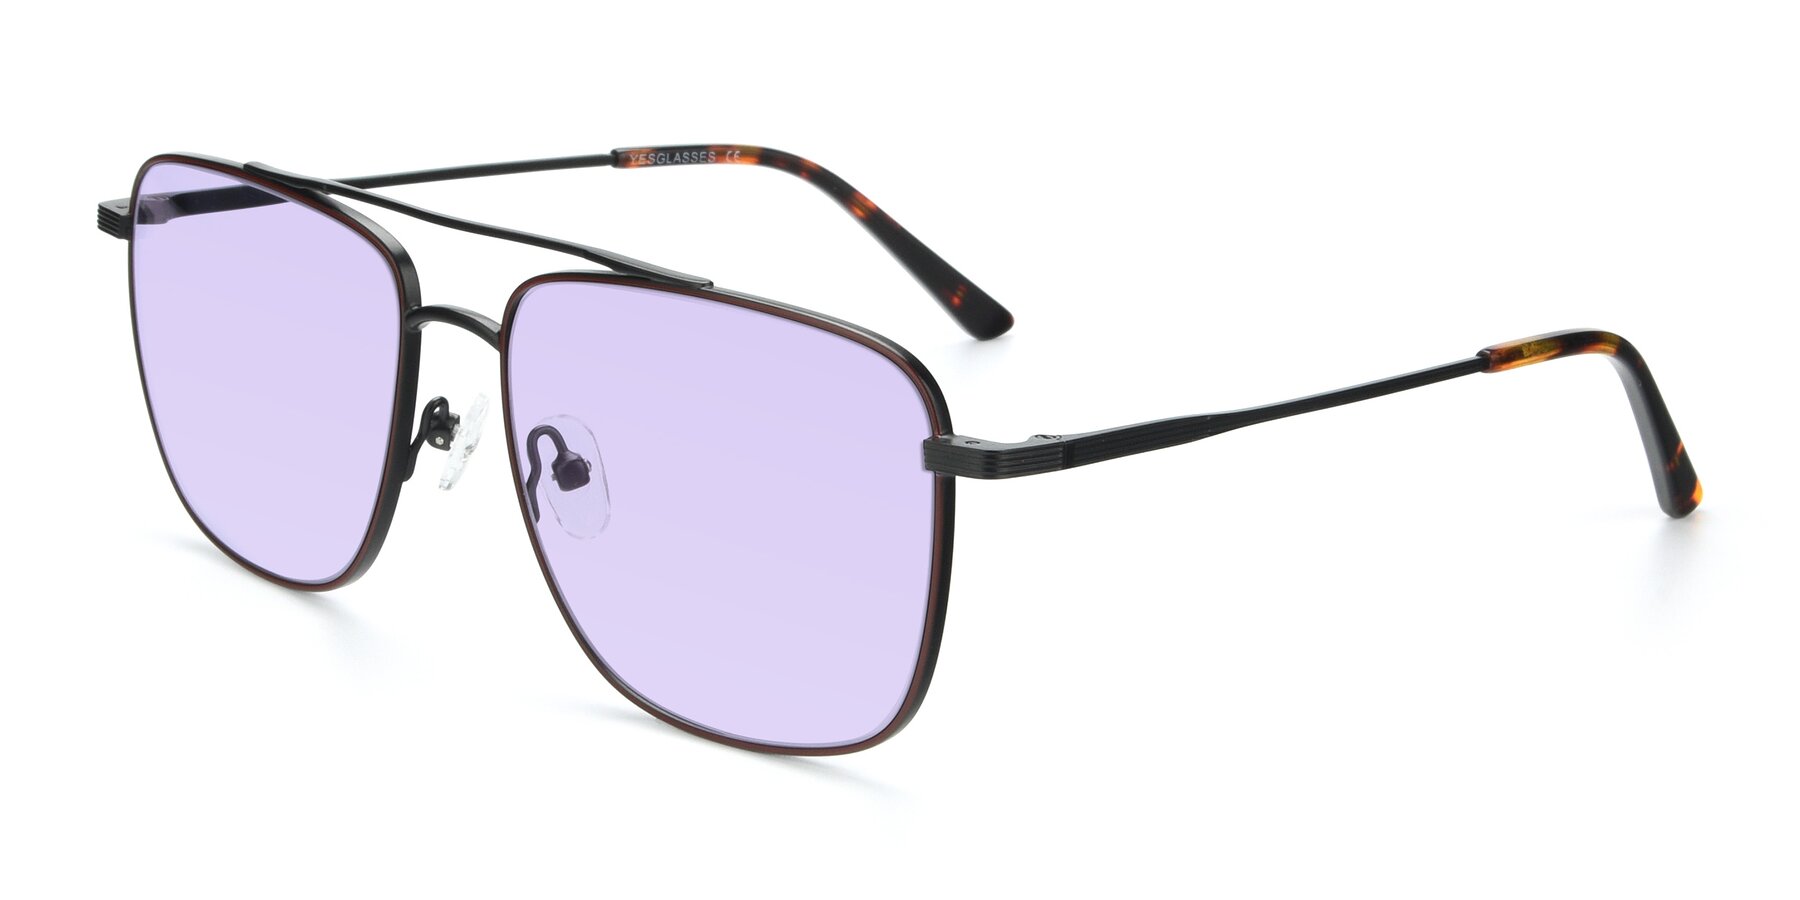 Angle of 9519 in Brown-Black with Light Purple Tinted Lenses